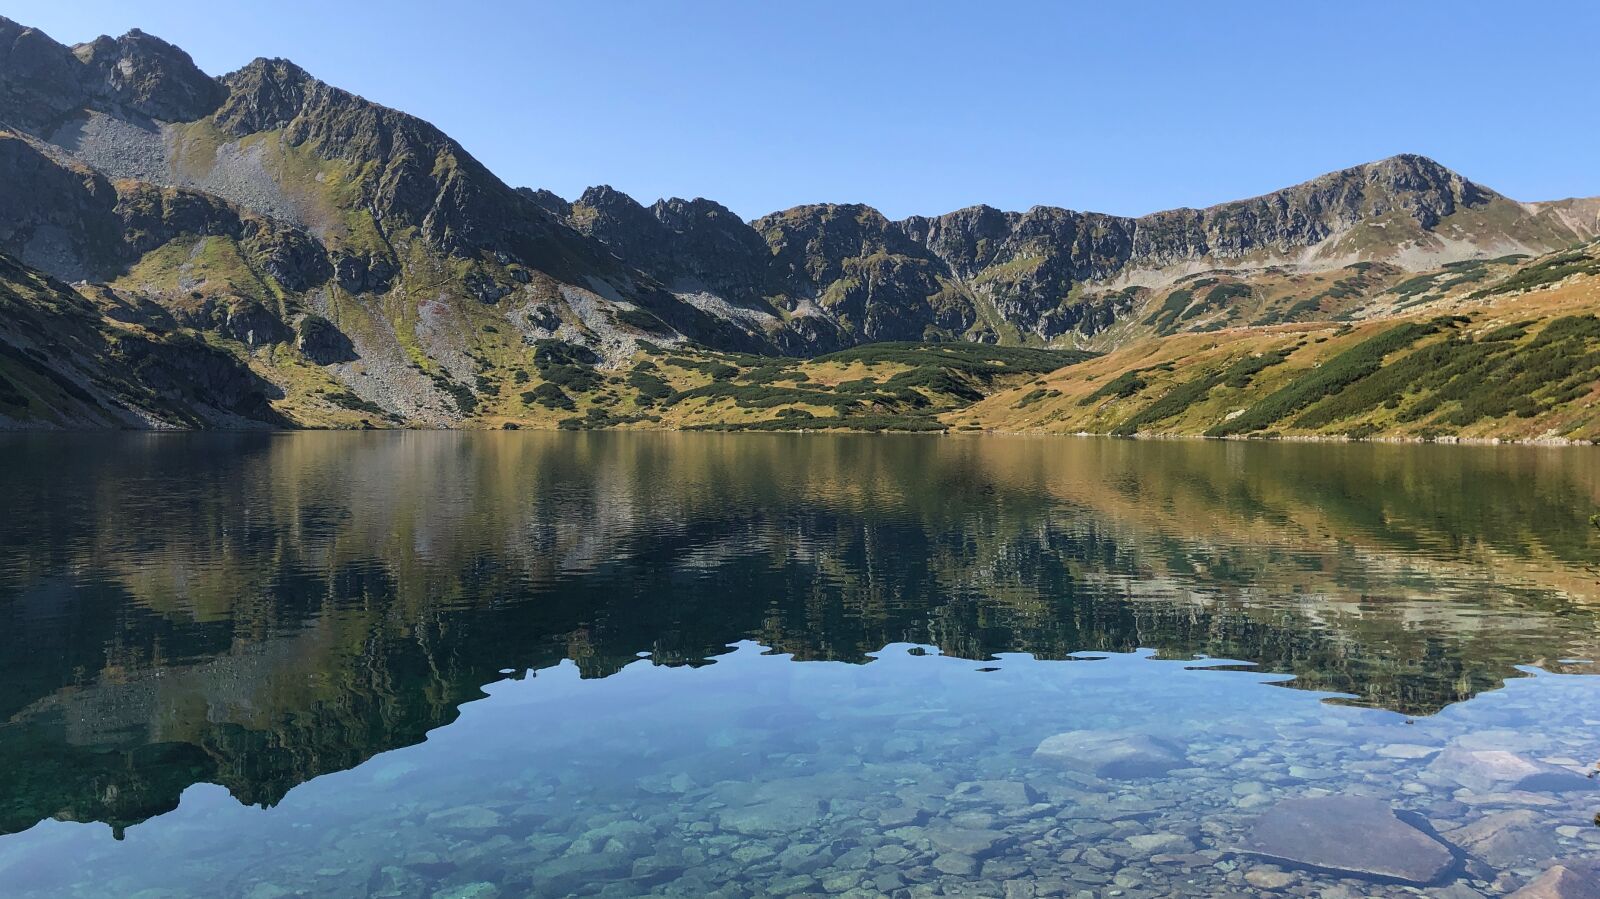 Apple iPhone 8 + iPhone 8 back camera 3.99mm f/1.8 sample photo. Tatry, mountains, water photography